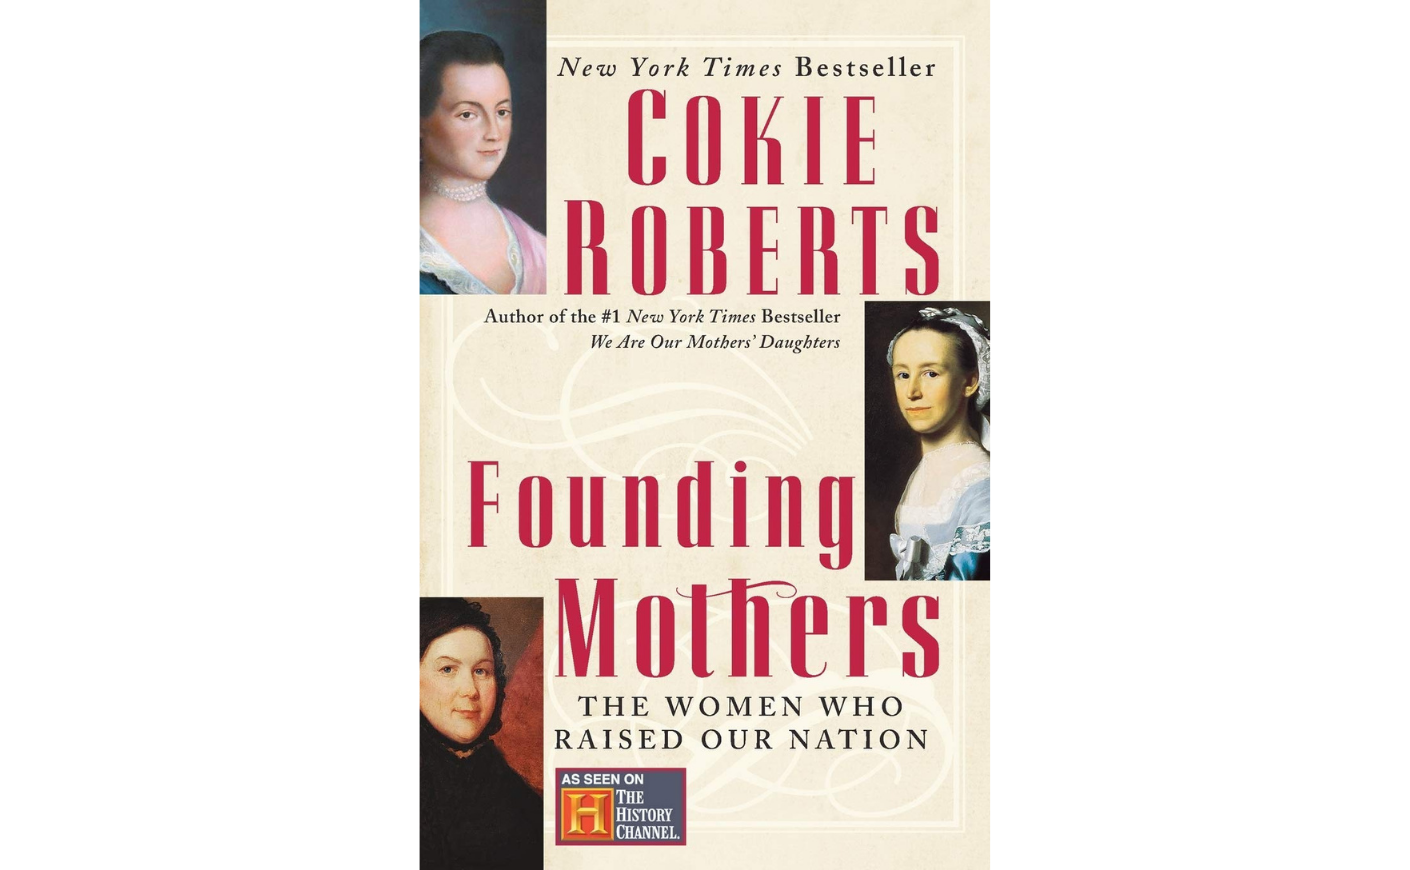 'Founding Mothers' by Cokie Roberts